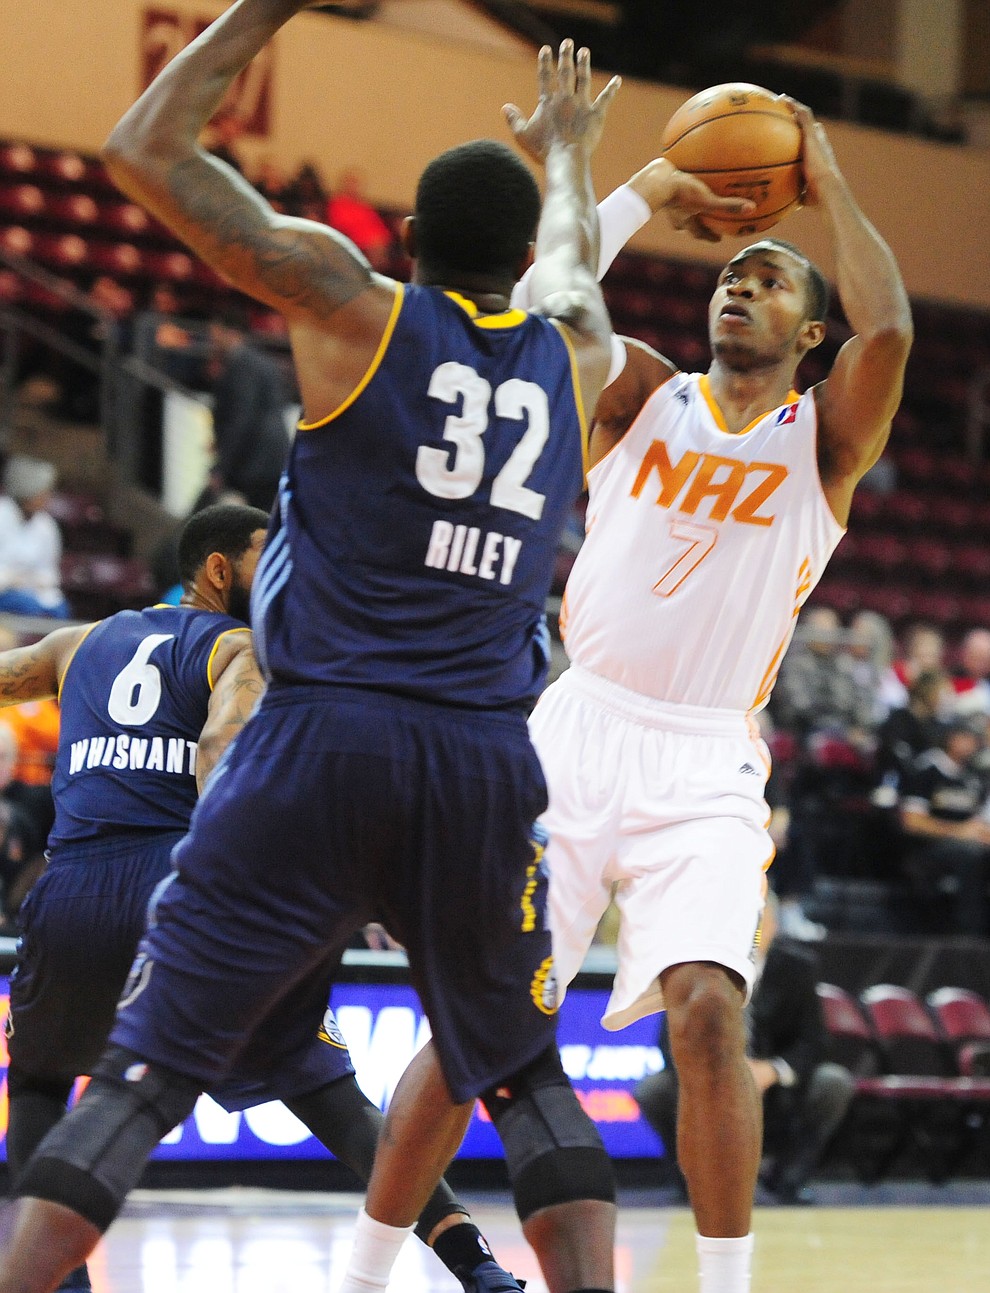 Northern Arizona's Elijah Millsap takes a shot as the Suns take on the Iowa Energy Saturday, December 10 at the Prescott Valley Event Center.  (Les Stukenberg/The Daily Courier)